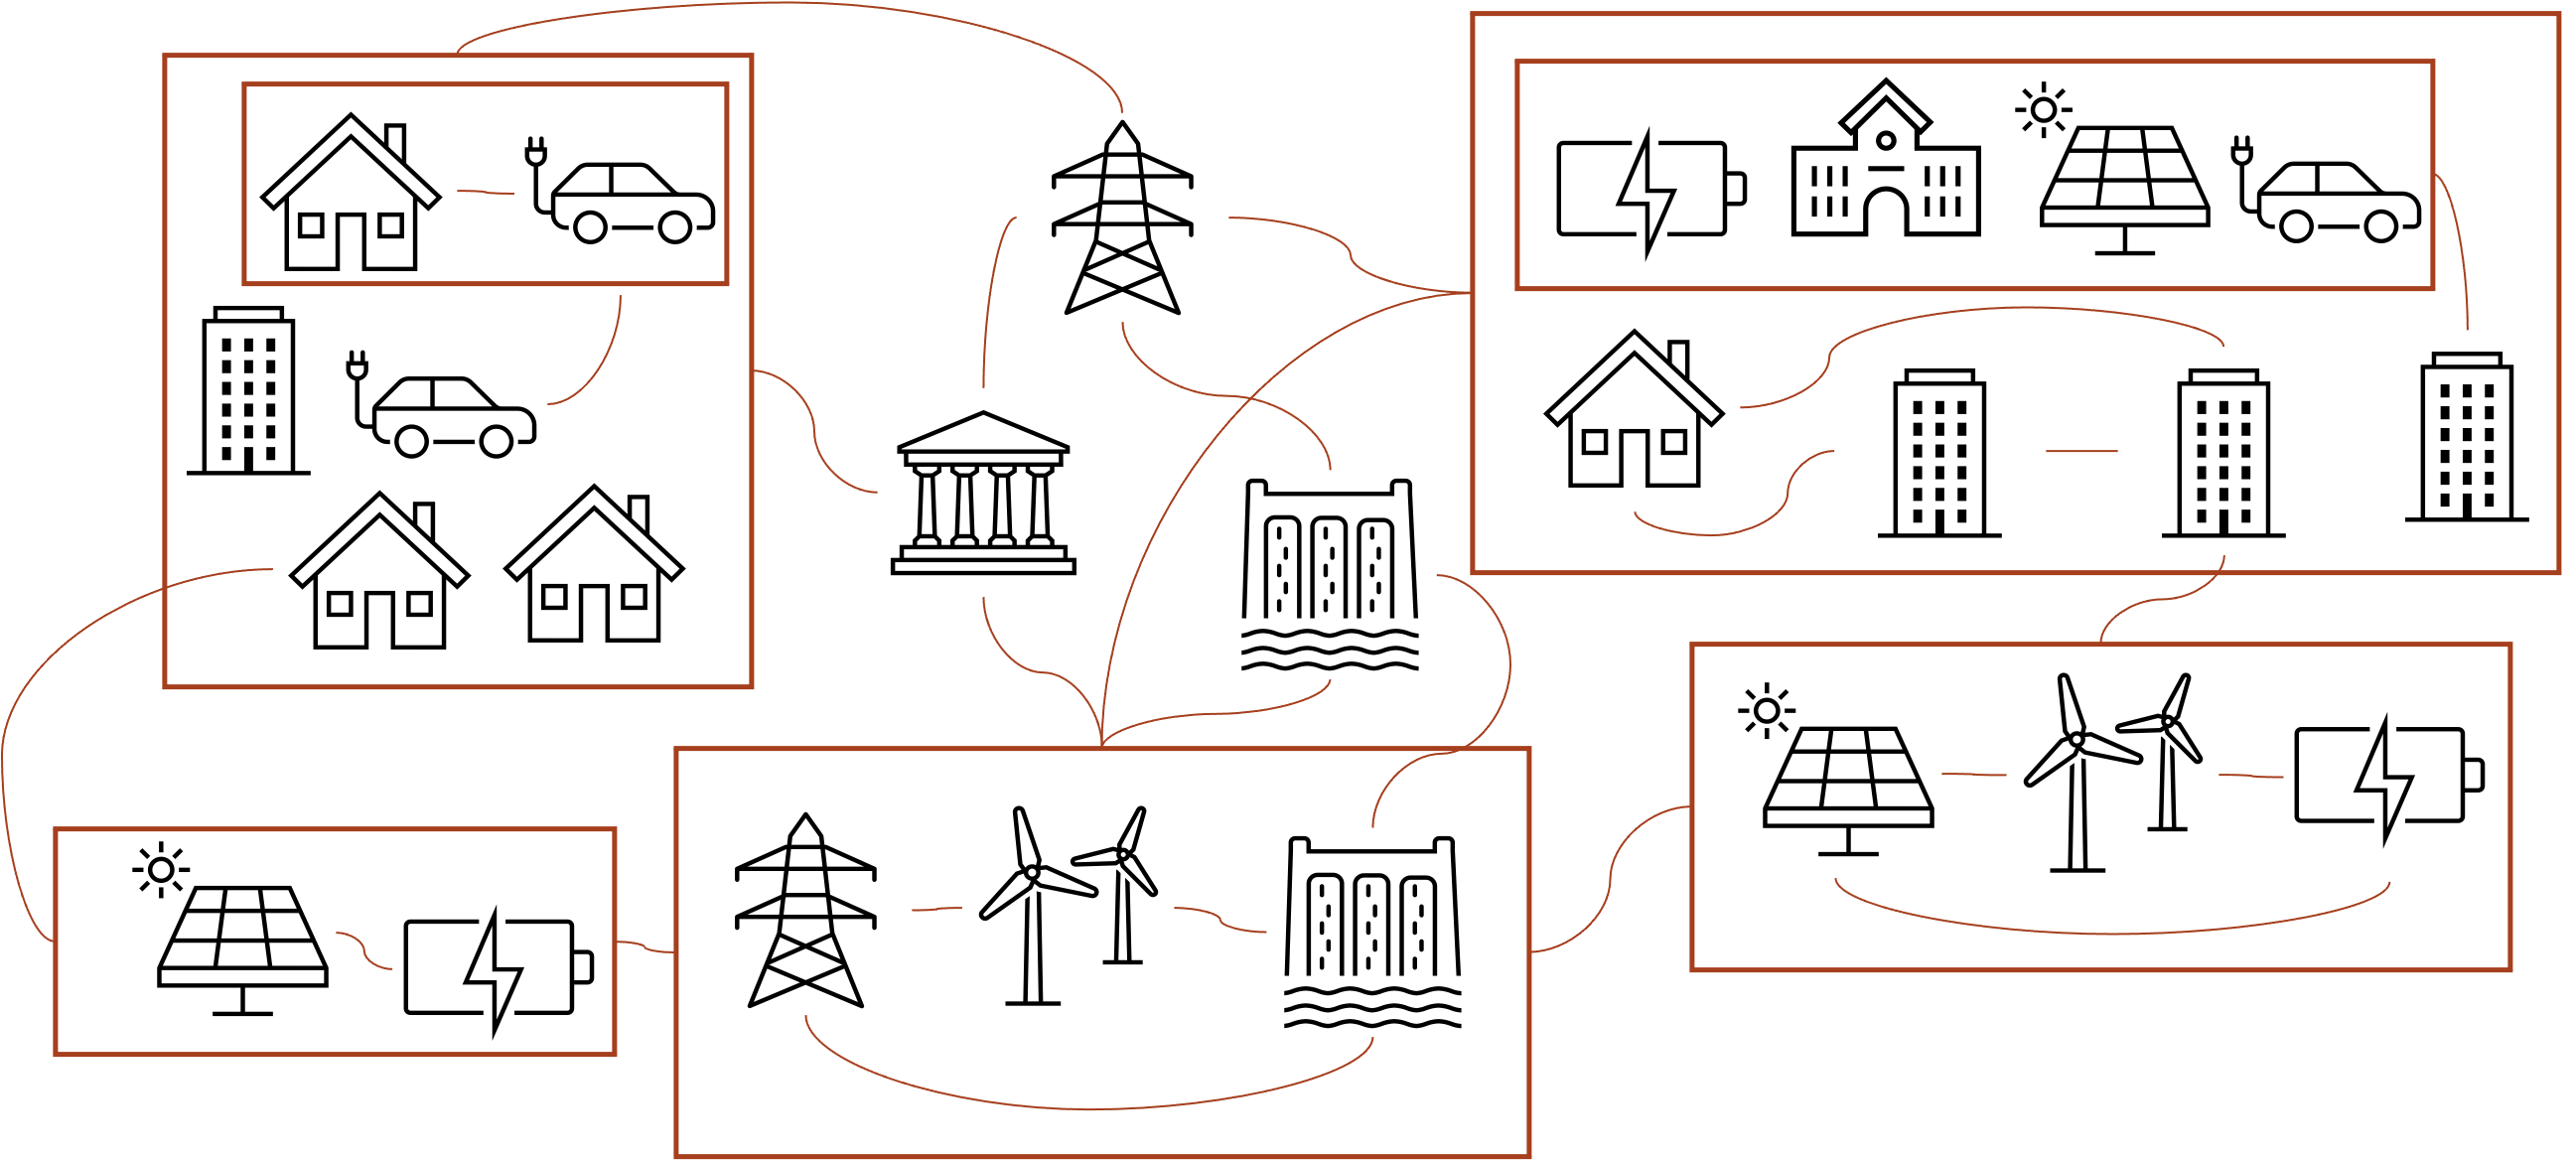 an illustration using icons related to the power system